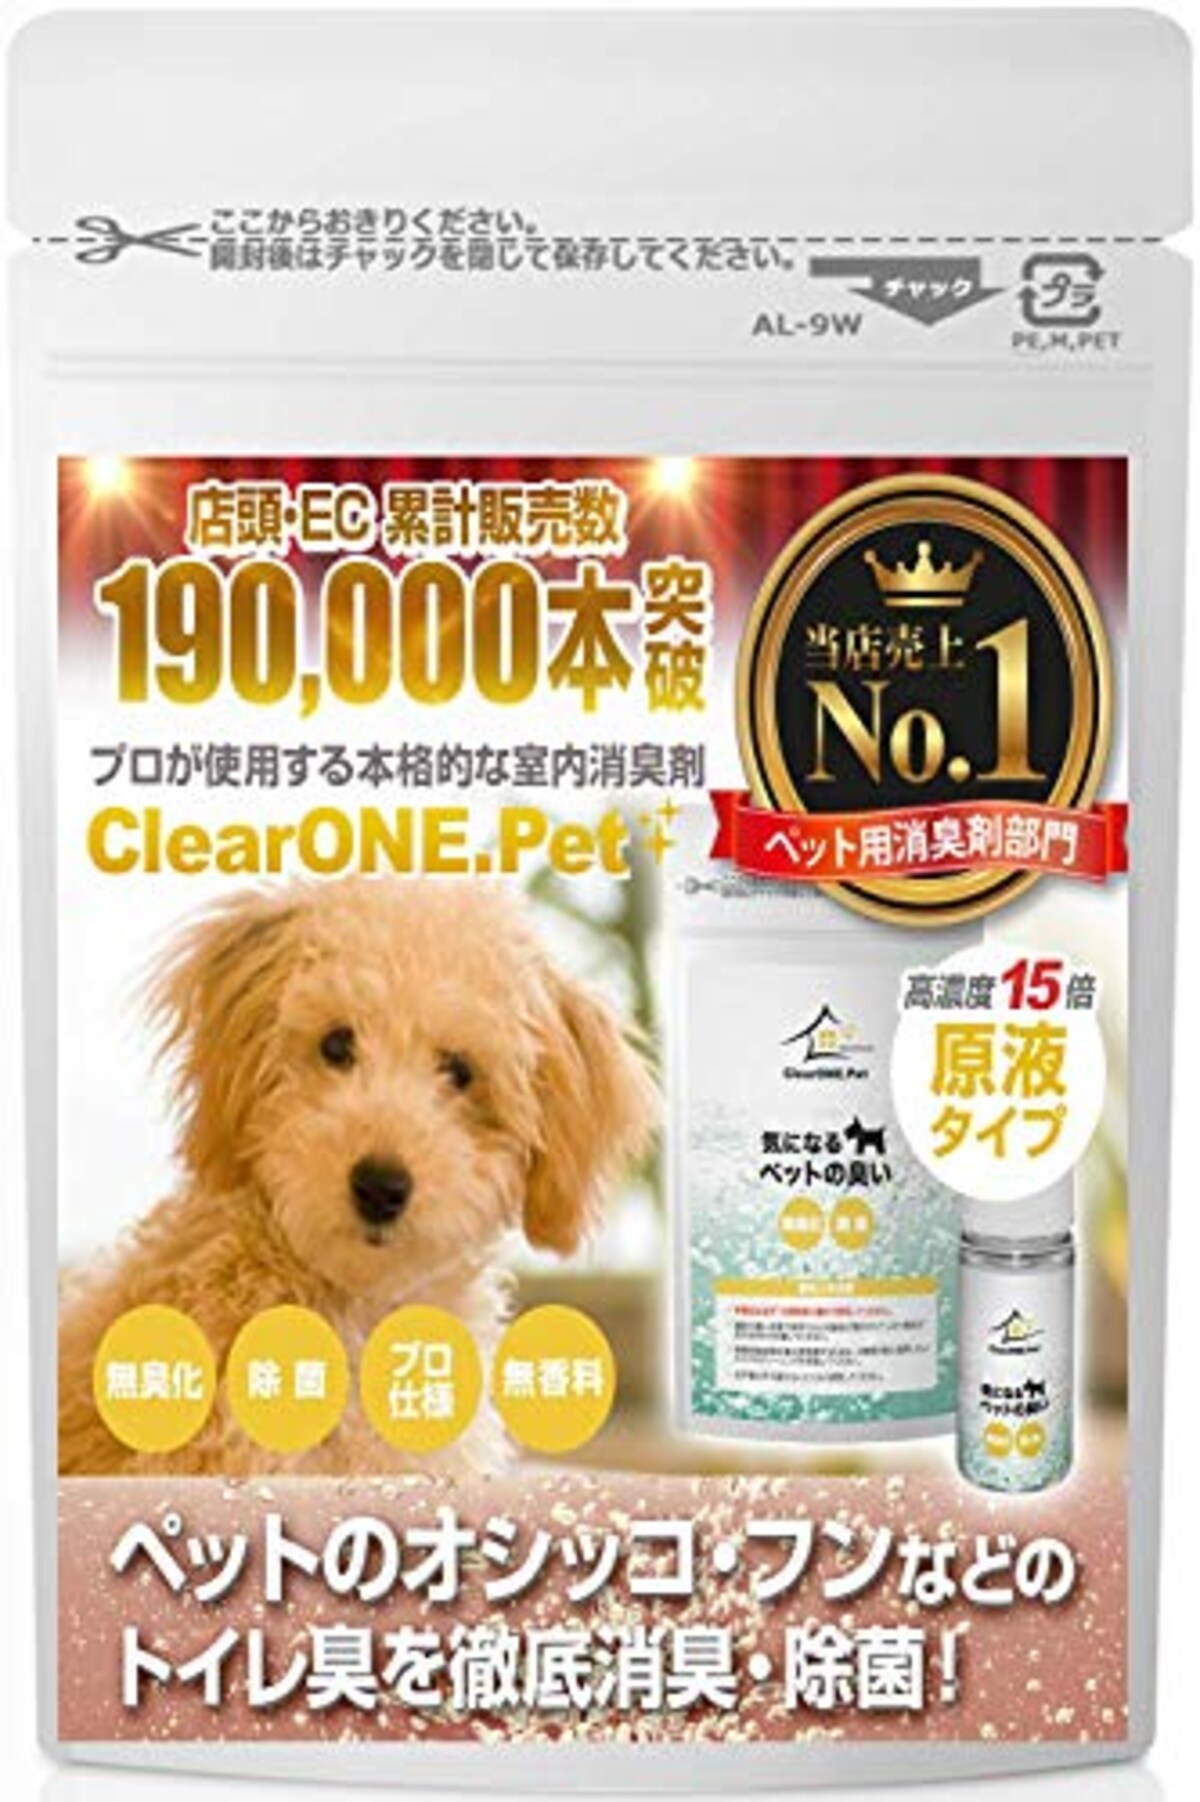 ClearONE.PET